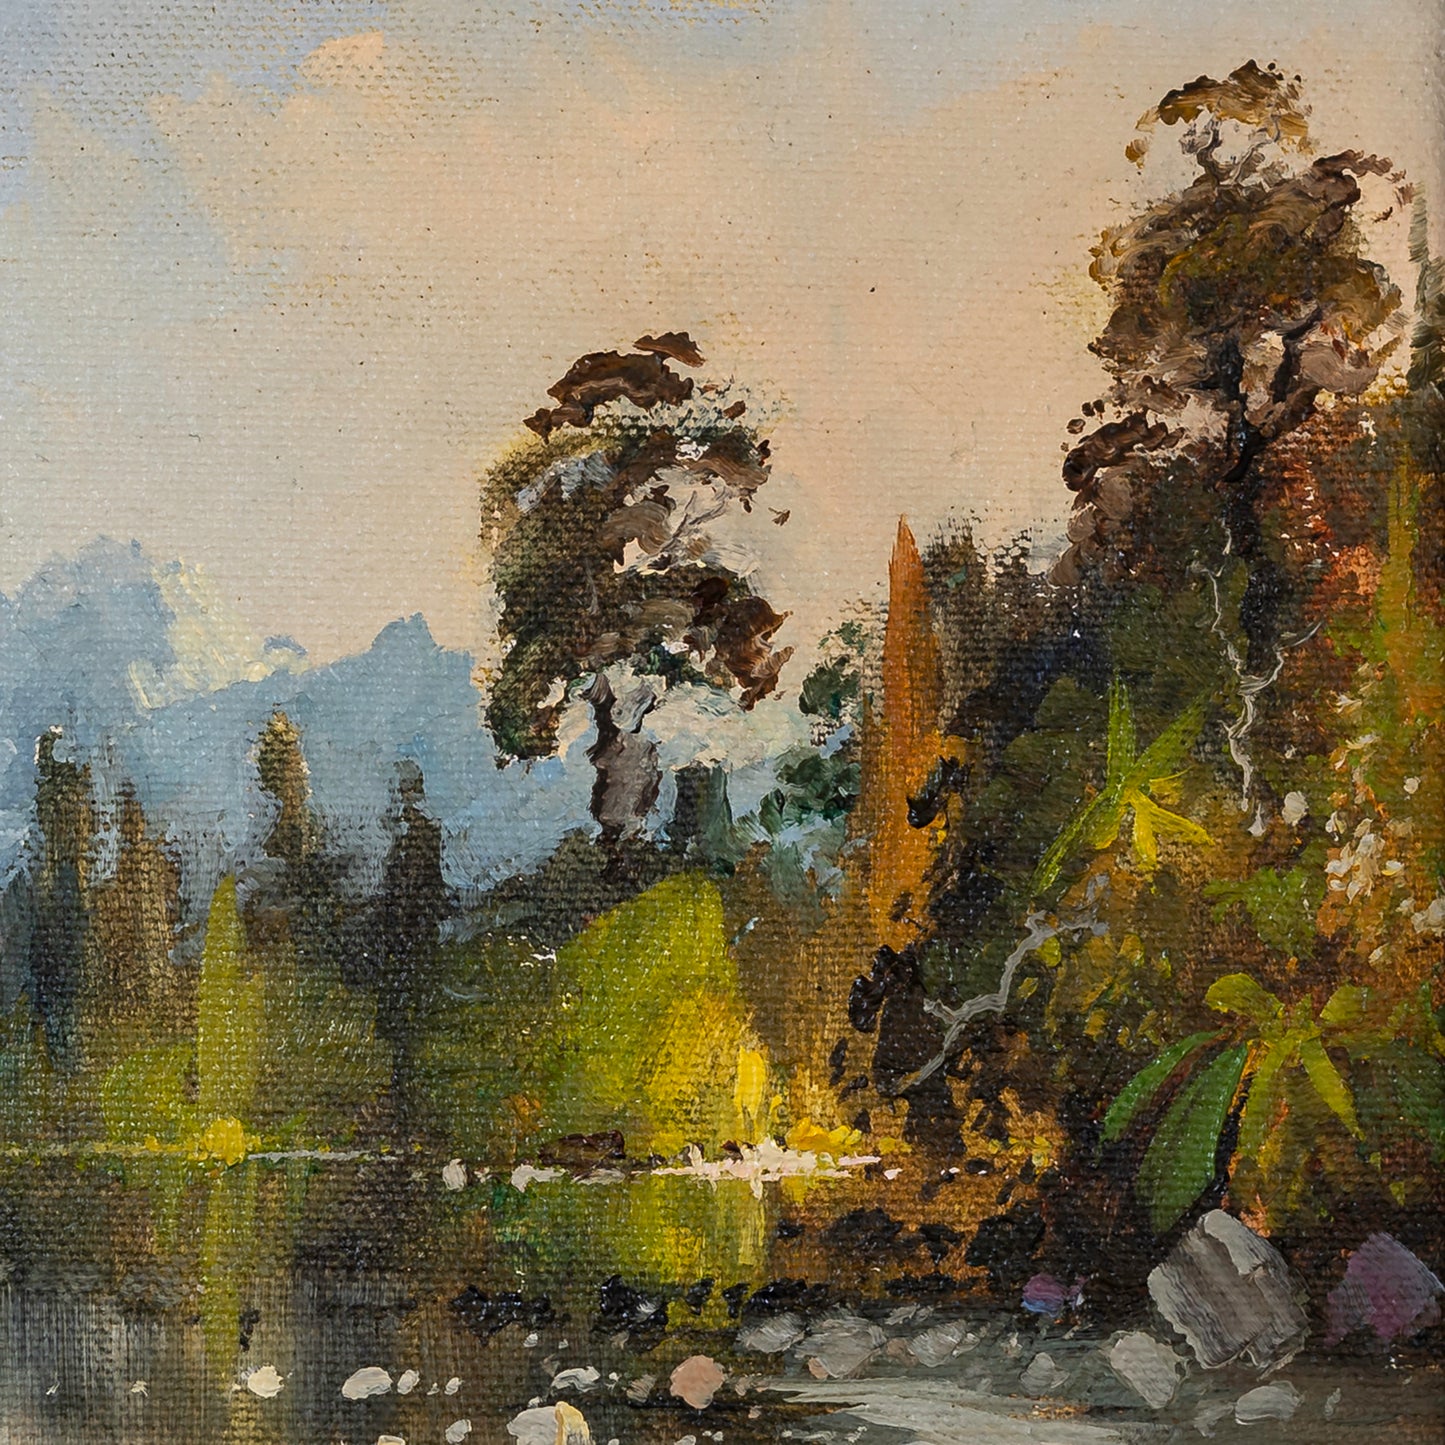 Partial detail of Oil Painting by Neil J Bartlett Mount Bonpland Lake Wakatipu Queenstown New Zealand Silver Fern Gallery